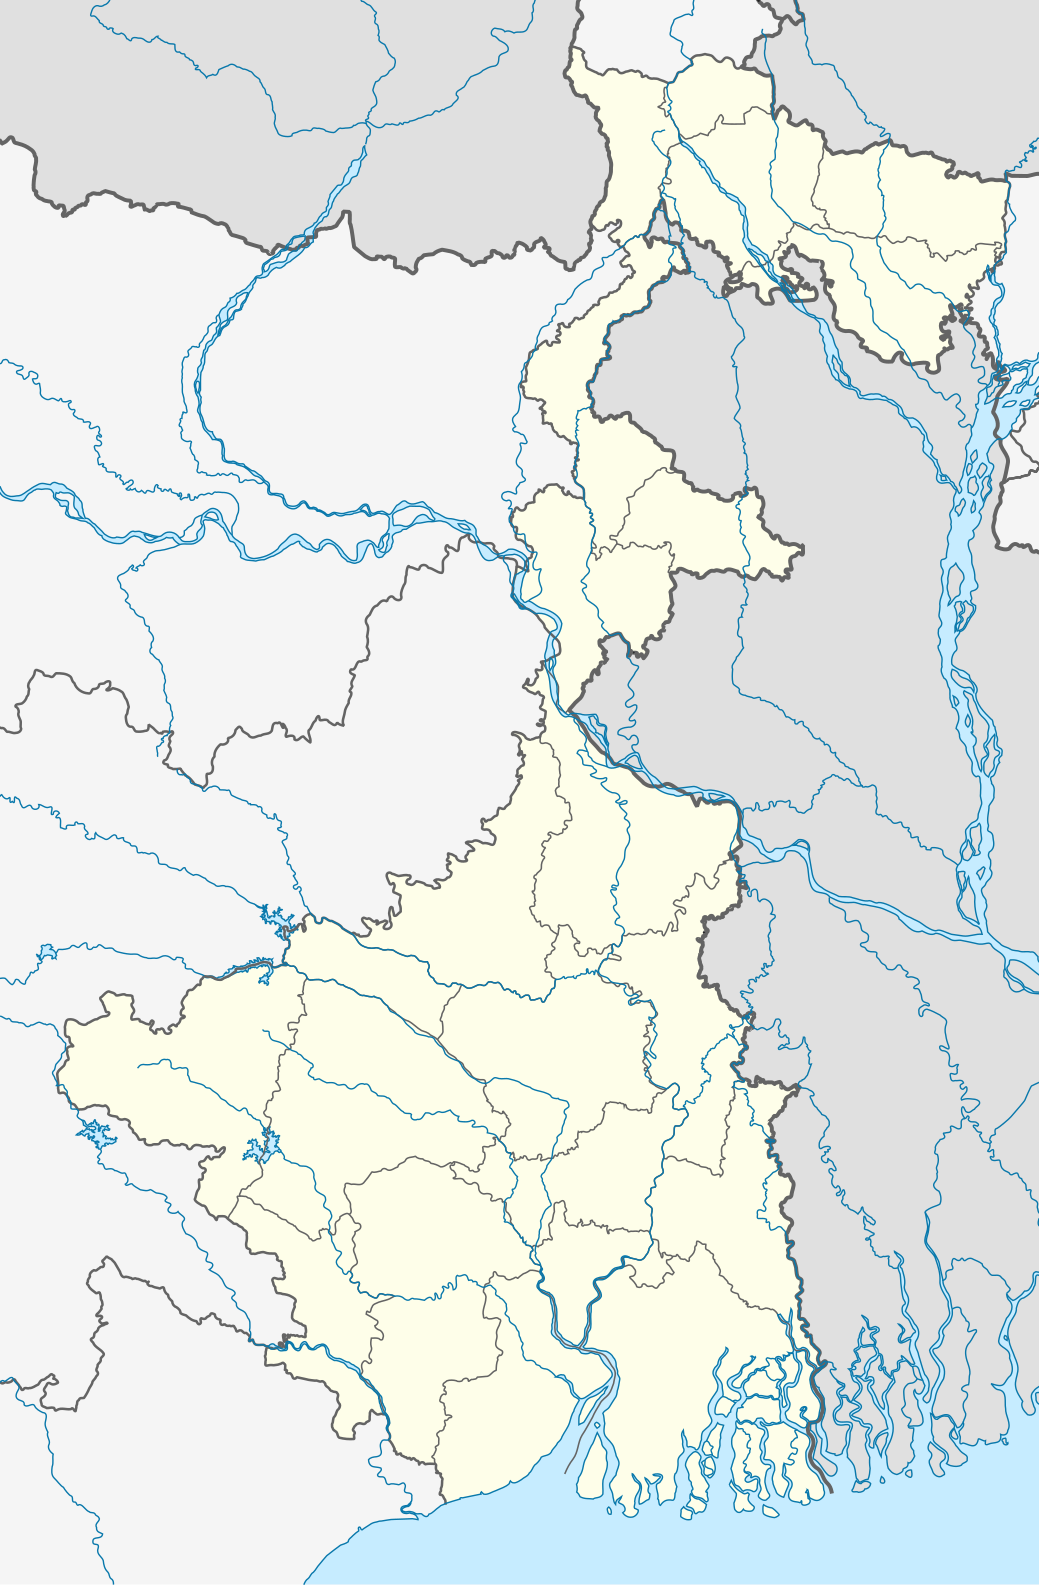 1039px-India_West_Bengal_location_map.svg.png